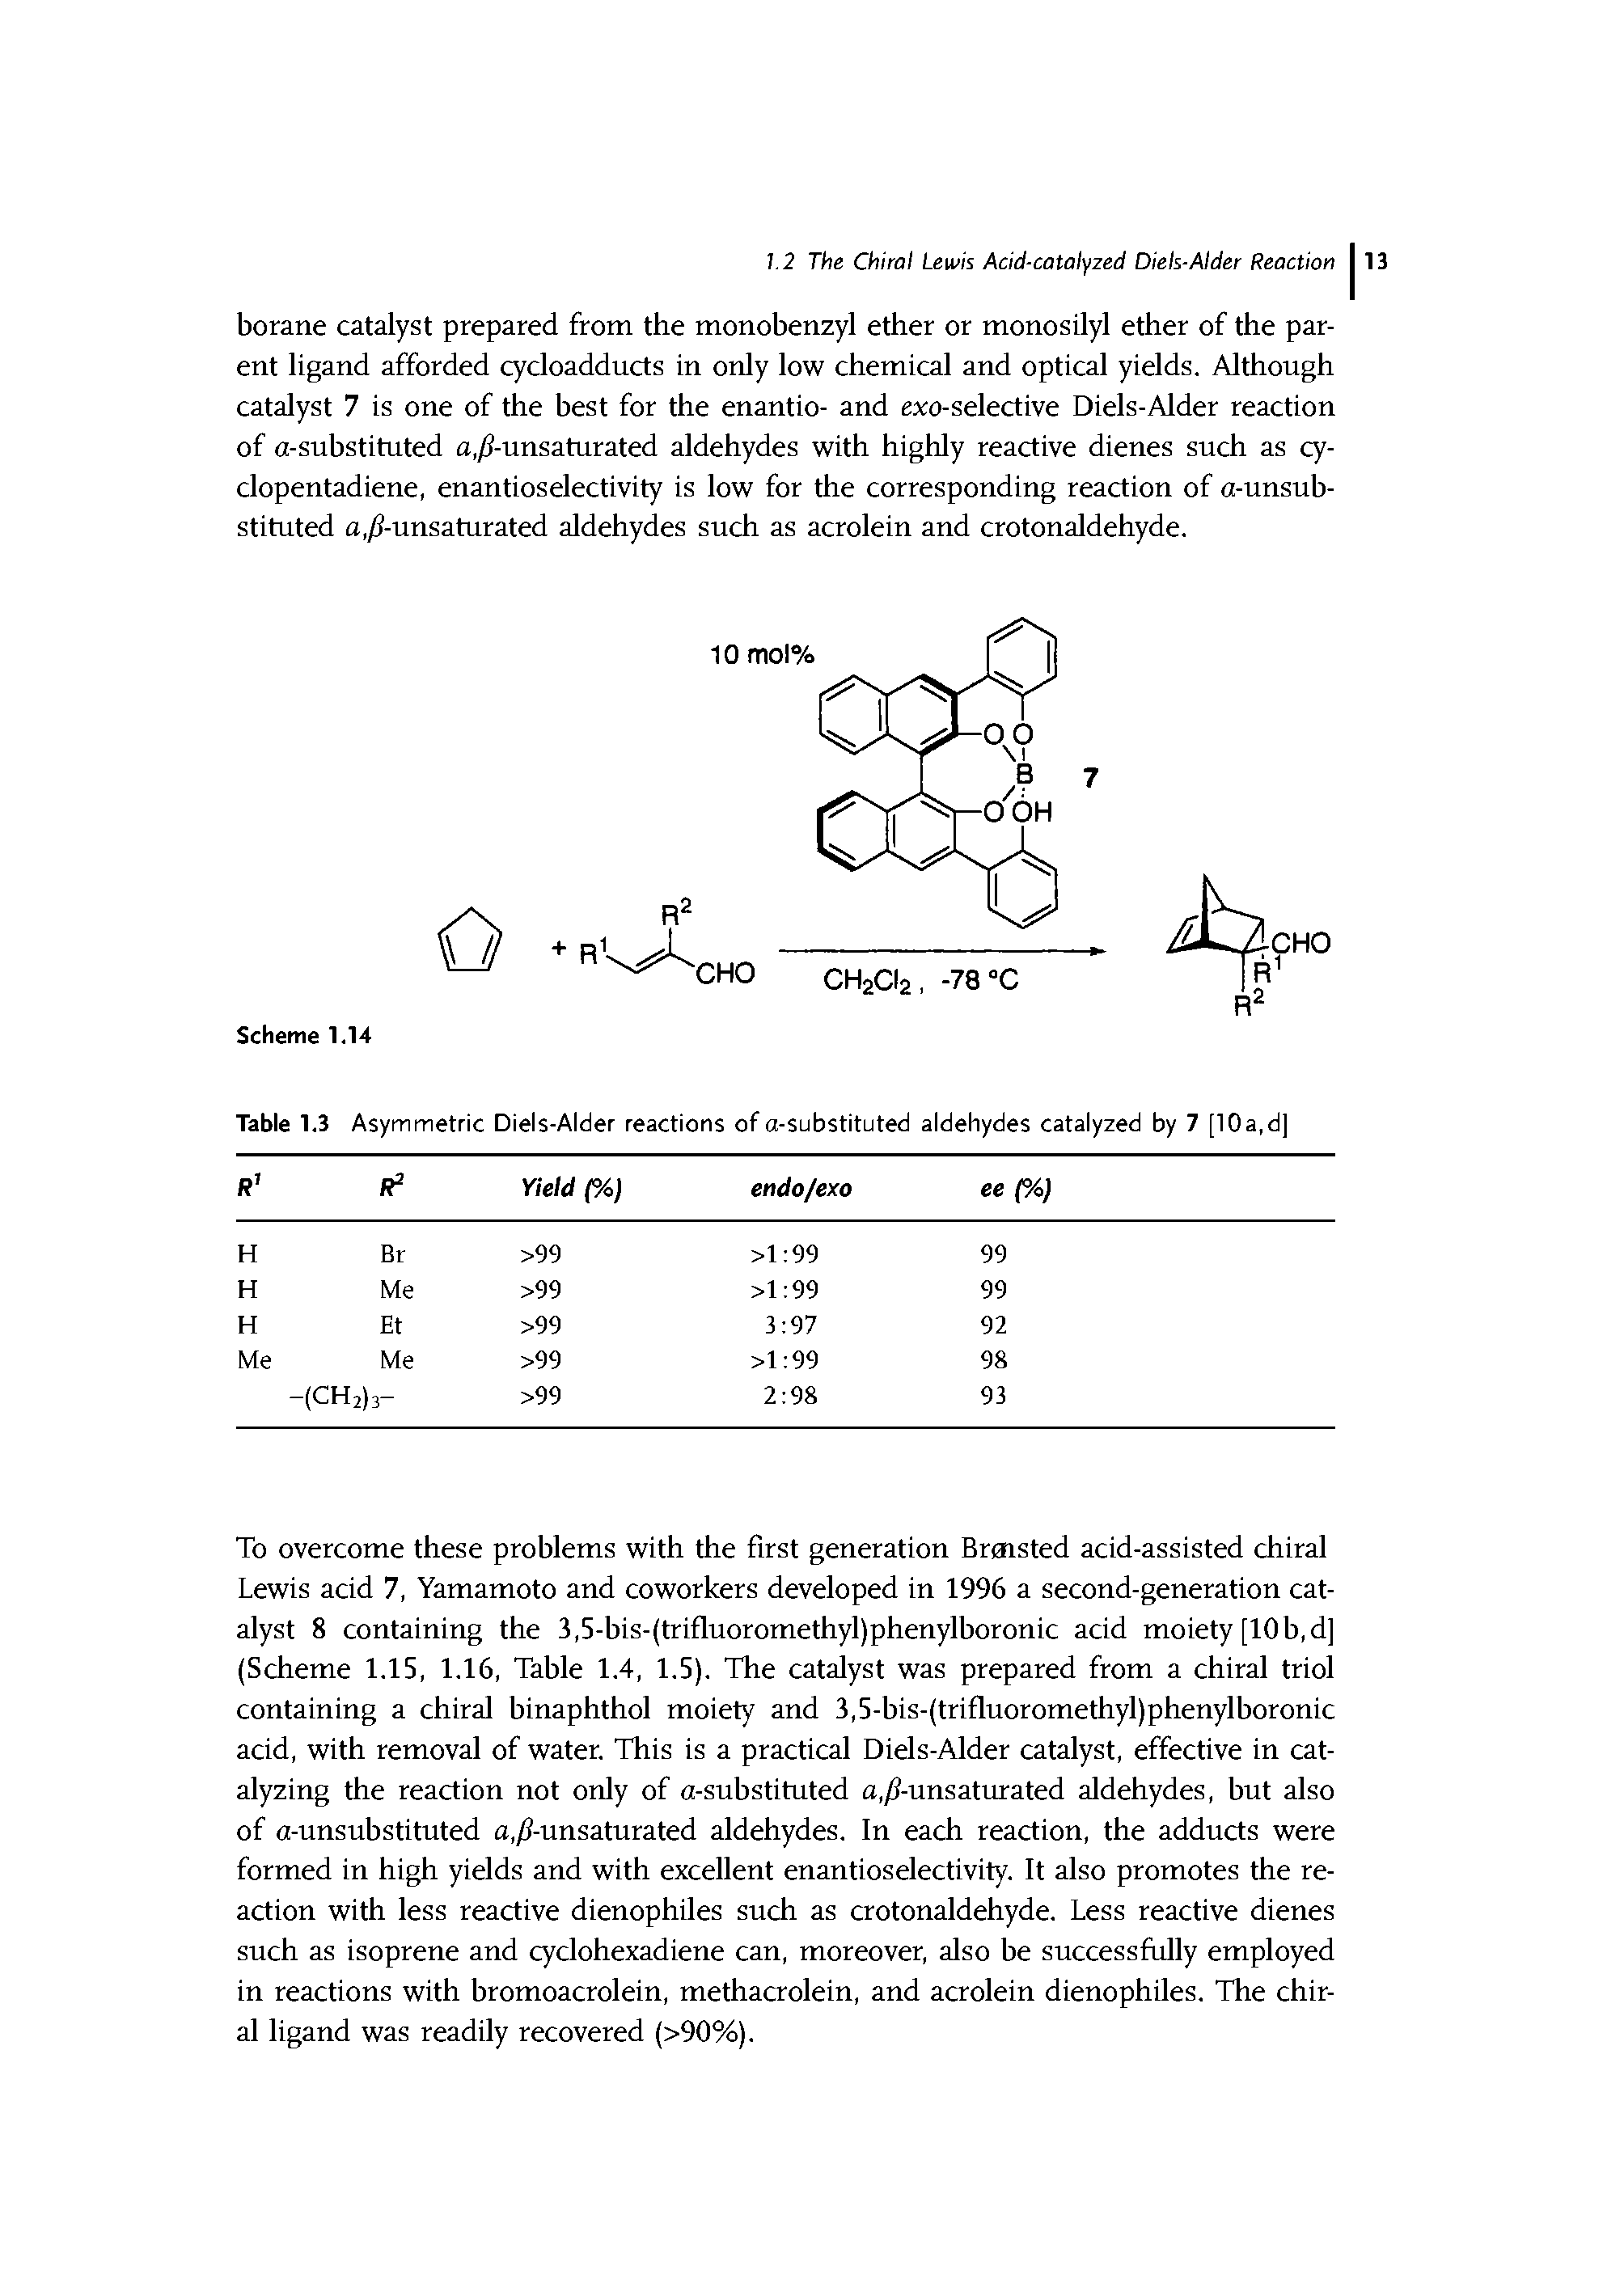 Table 1.3 Asymmetric Diels-Alder reactions of a-substituted aldehydes catalyzed by 7 [10a,d ...